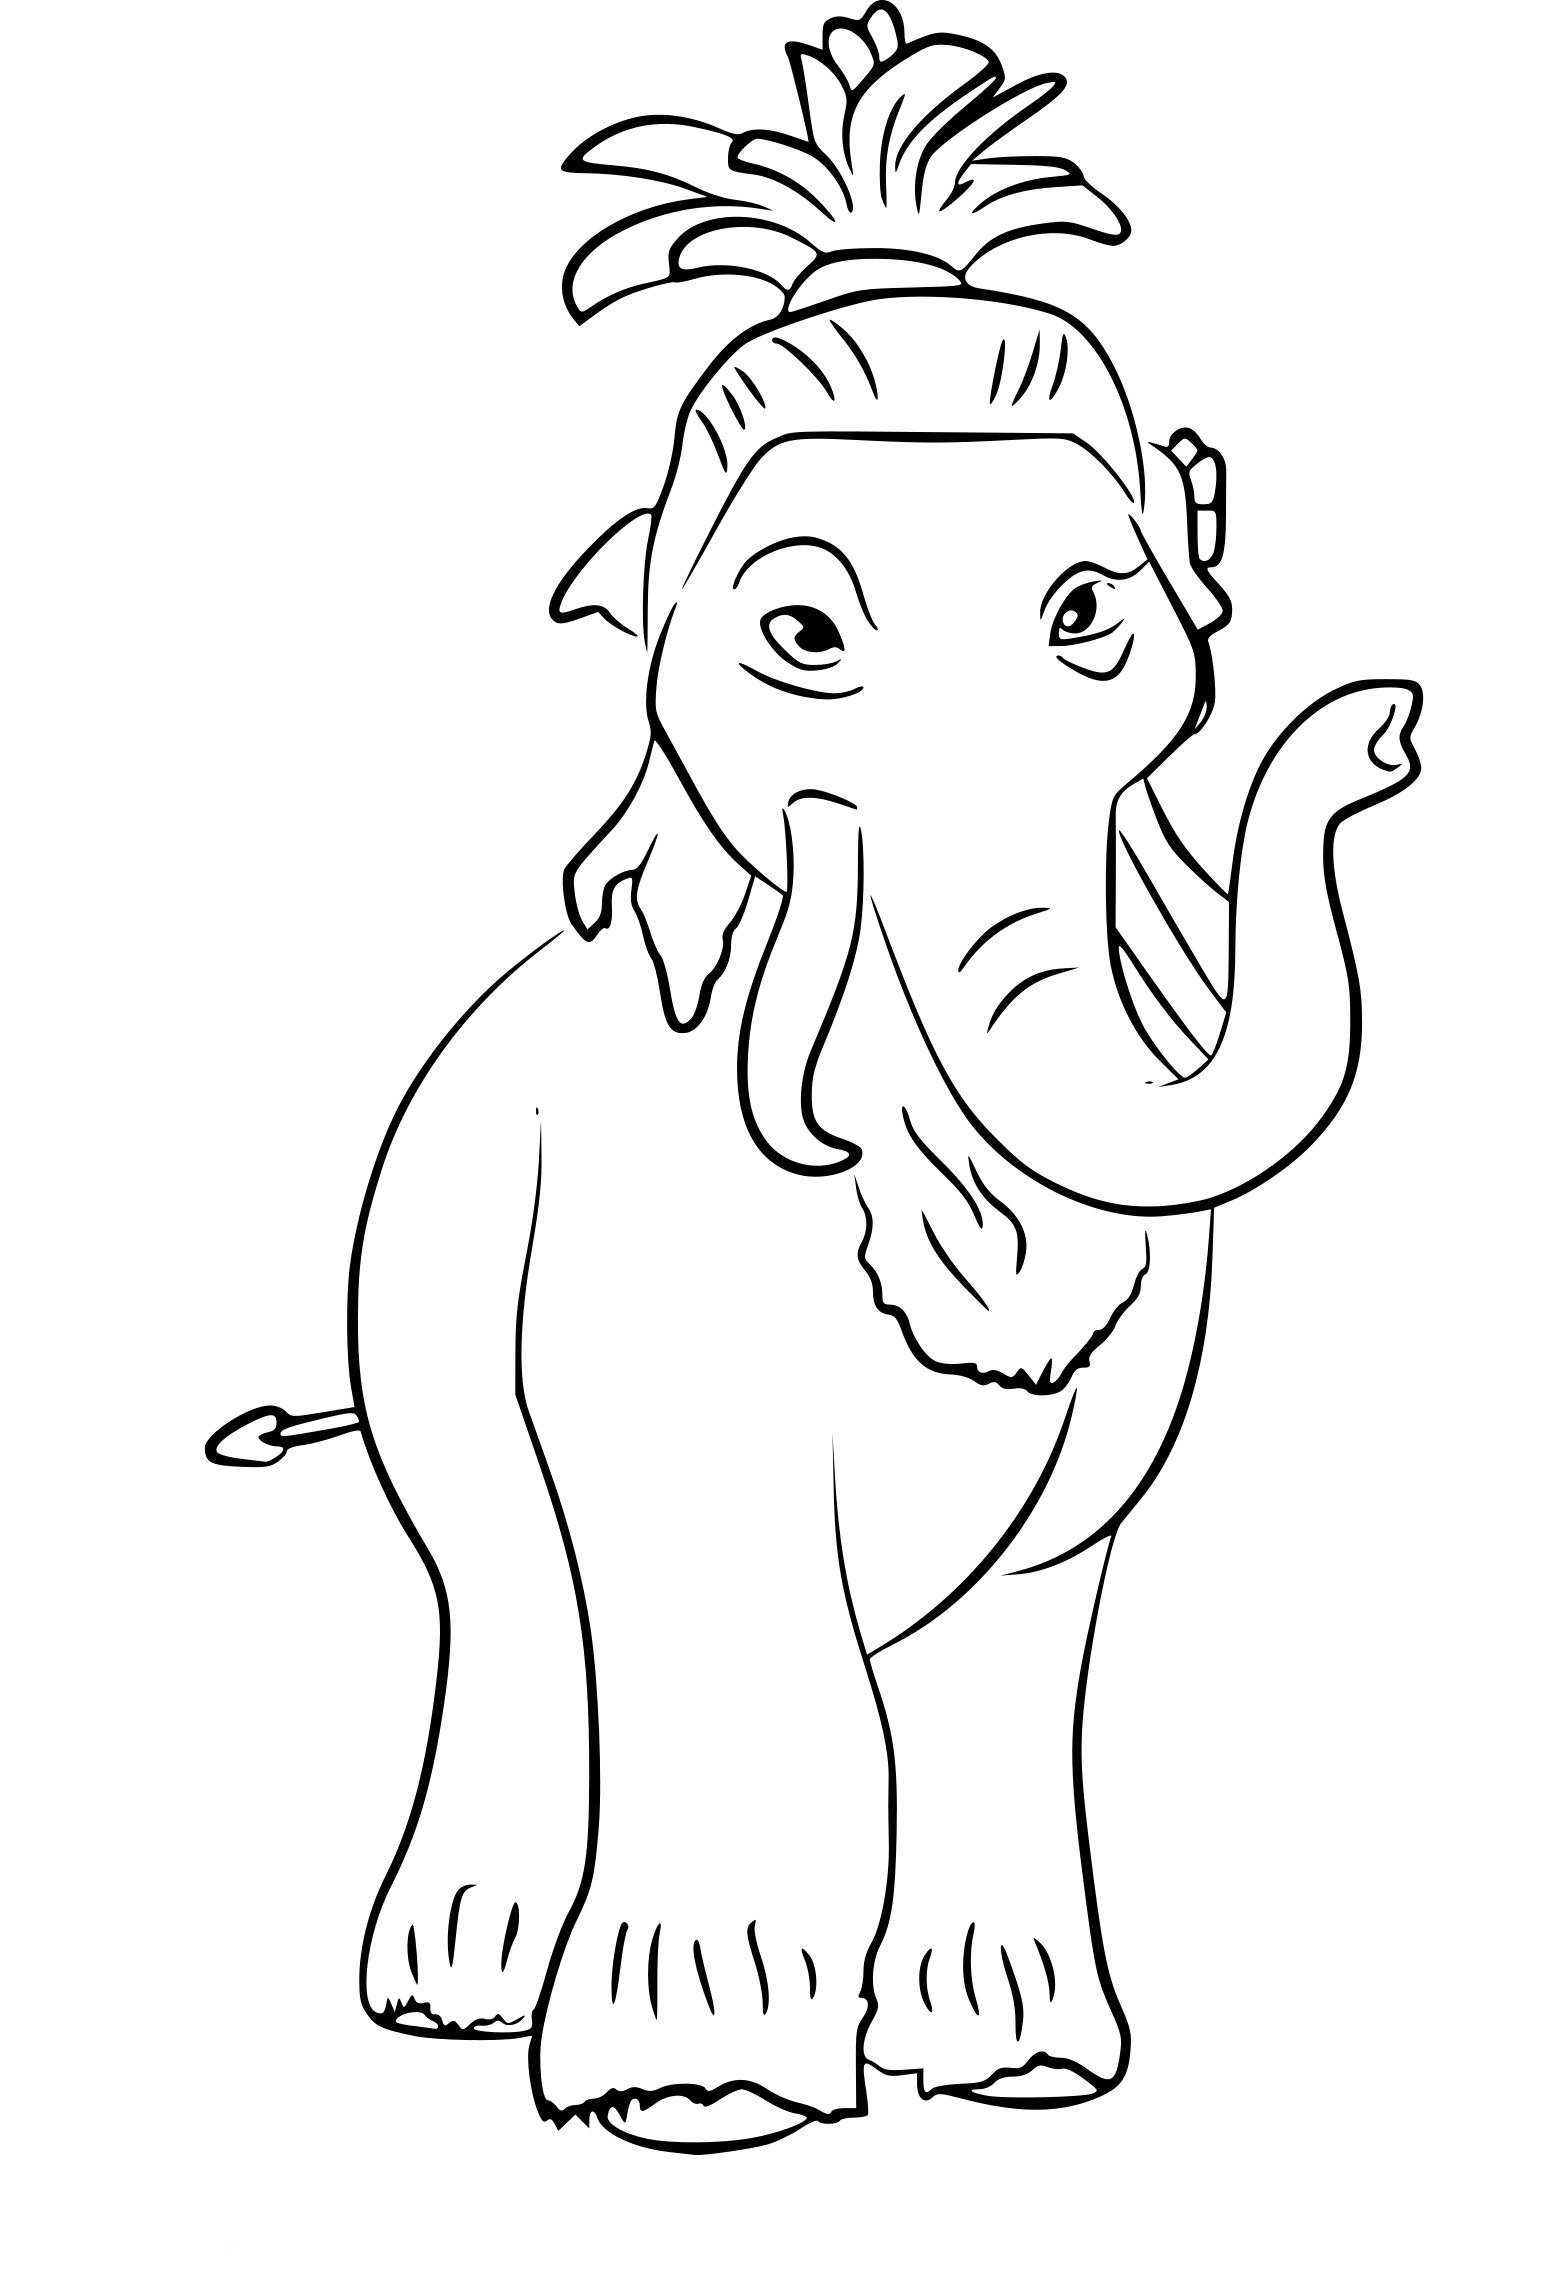 Katie Ice Age 4 coloring page